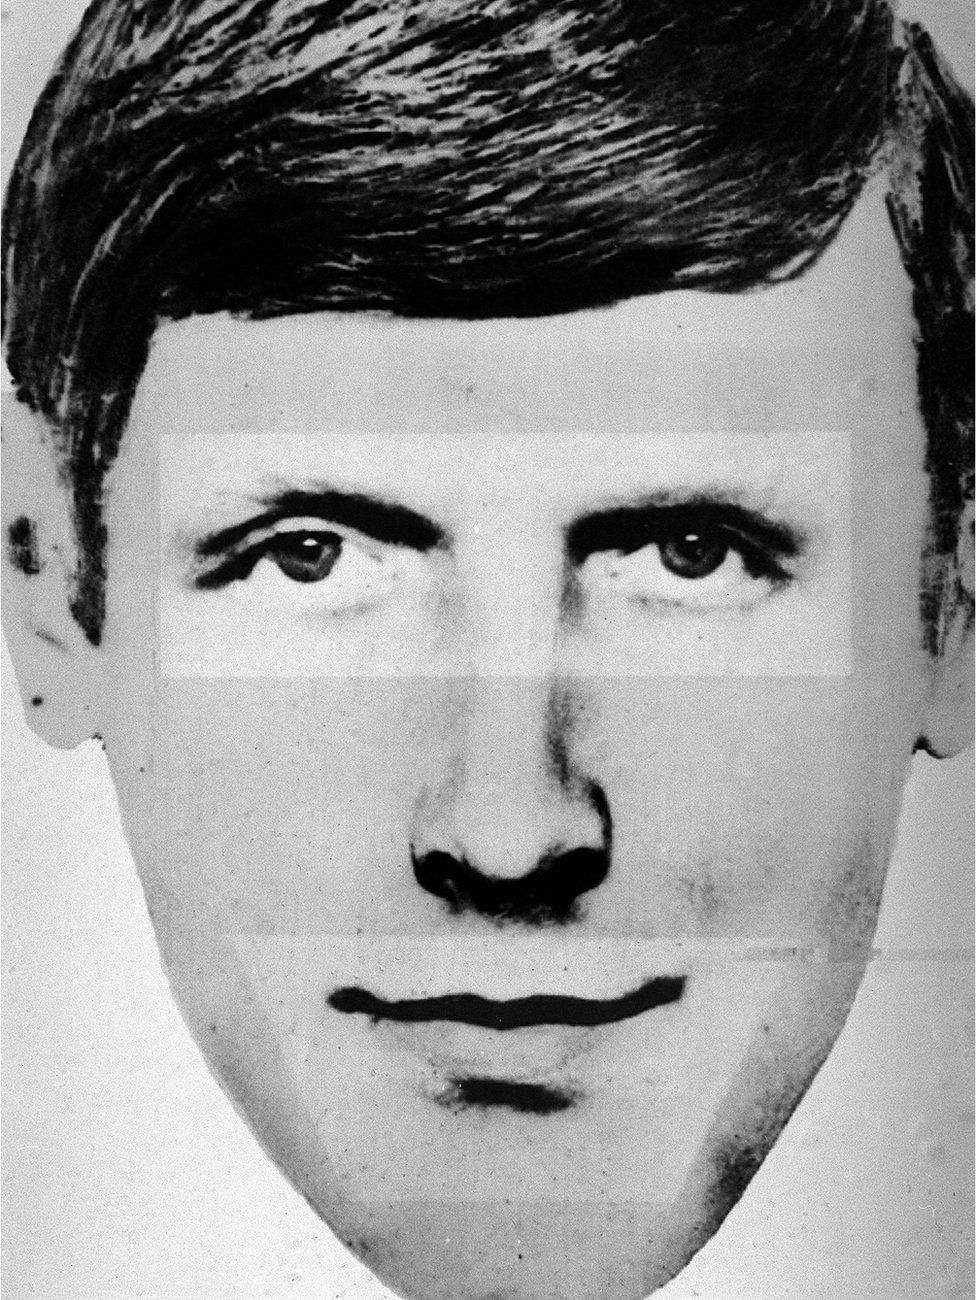 File photofit of 60's killer Bible John, a police forensic team exhumed the remains of John Irvine McInnes, who they believe could be Bible John, from a grave in Stonehouse Cemetery. 14/10/00: The identity of a new prime suspect has been given to police. * ...to Lothian and Borders Police by leading criminal psychologist Ian Stephen, who was closely involved in the hunt for the triple murderer, accirding to newspaper reports.